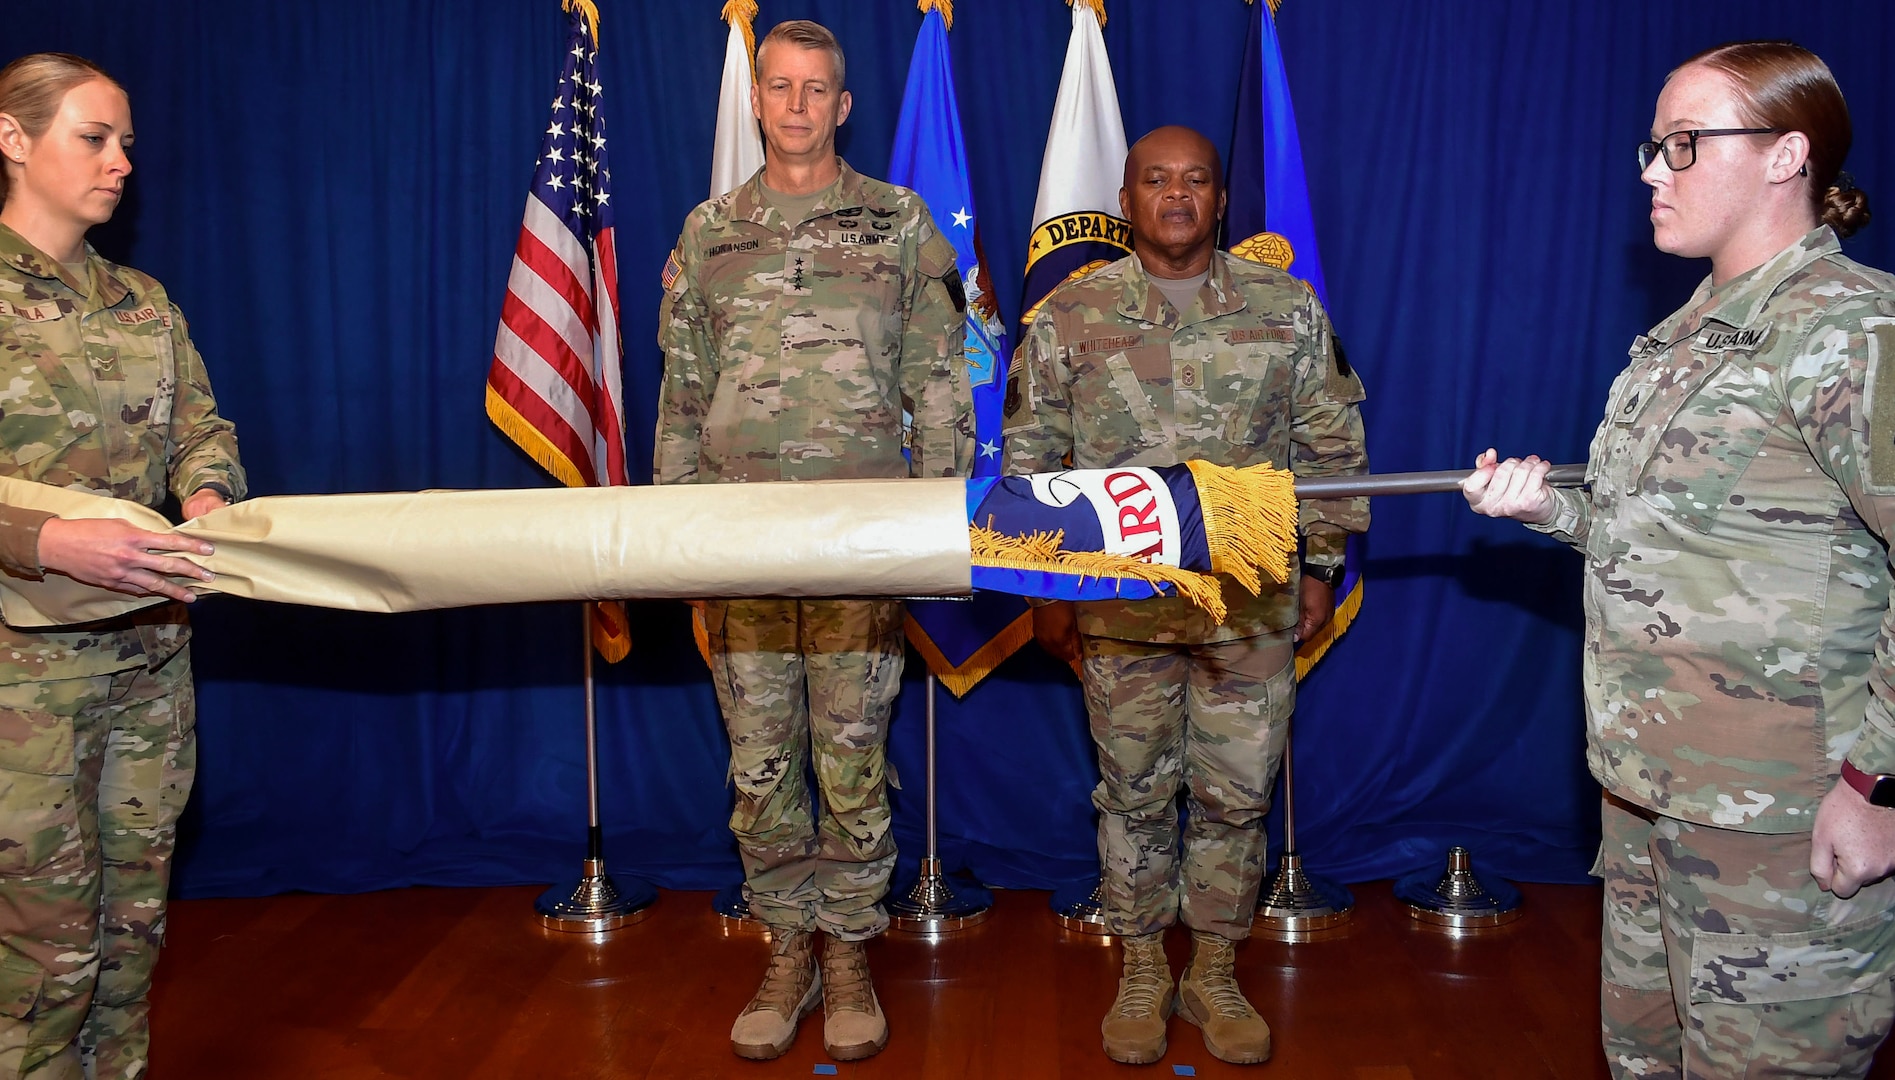 Army Gen. Daniel Hokanson, chief of the National Guard Bureau, presents the positional colors to Senior Enlisted Advisor Tony Whitehead at Joint Base Myer-Henderson Hall, Va., Nov. 1, 2023. This marks the first time a senior enlisted advisor to the National Guard chief is recognized with such colors, a milestone in a tradition that dates to 1636.